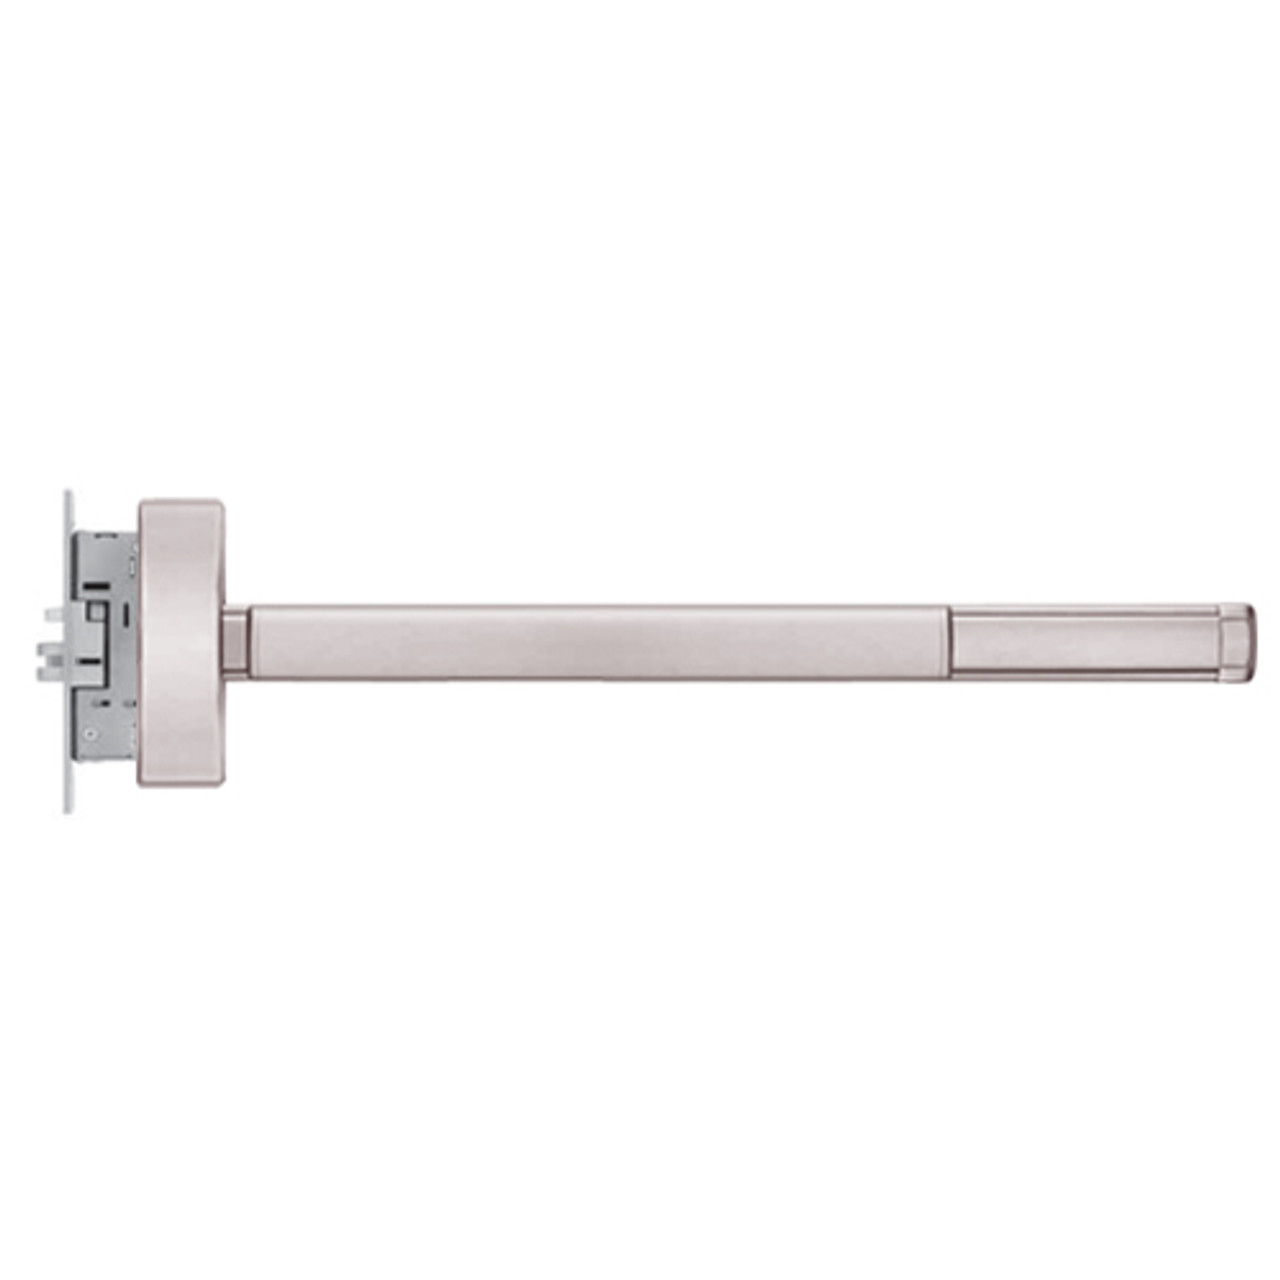 TSFL2314-LHR-628-36 PHI 2300 Series Fire Rated Apex Mortise Exit Device with Touchbar Monitoring Switch Prepped for Lever-Knob Always Active in Satin Aluminum Finish